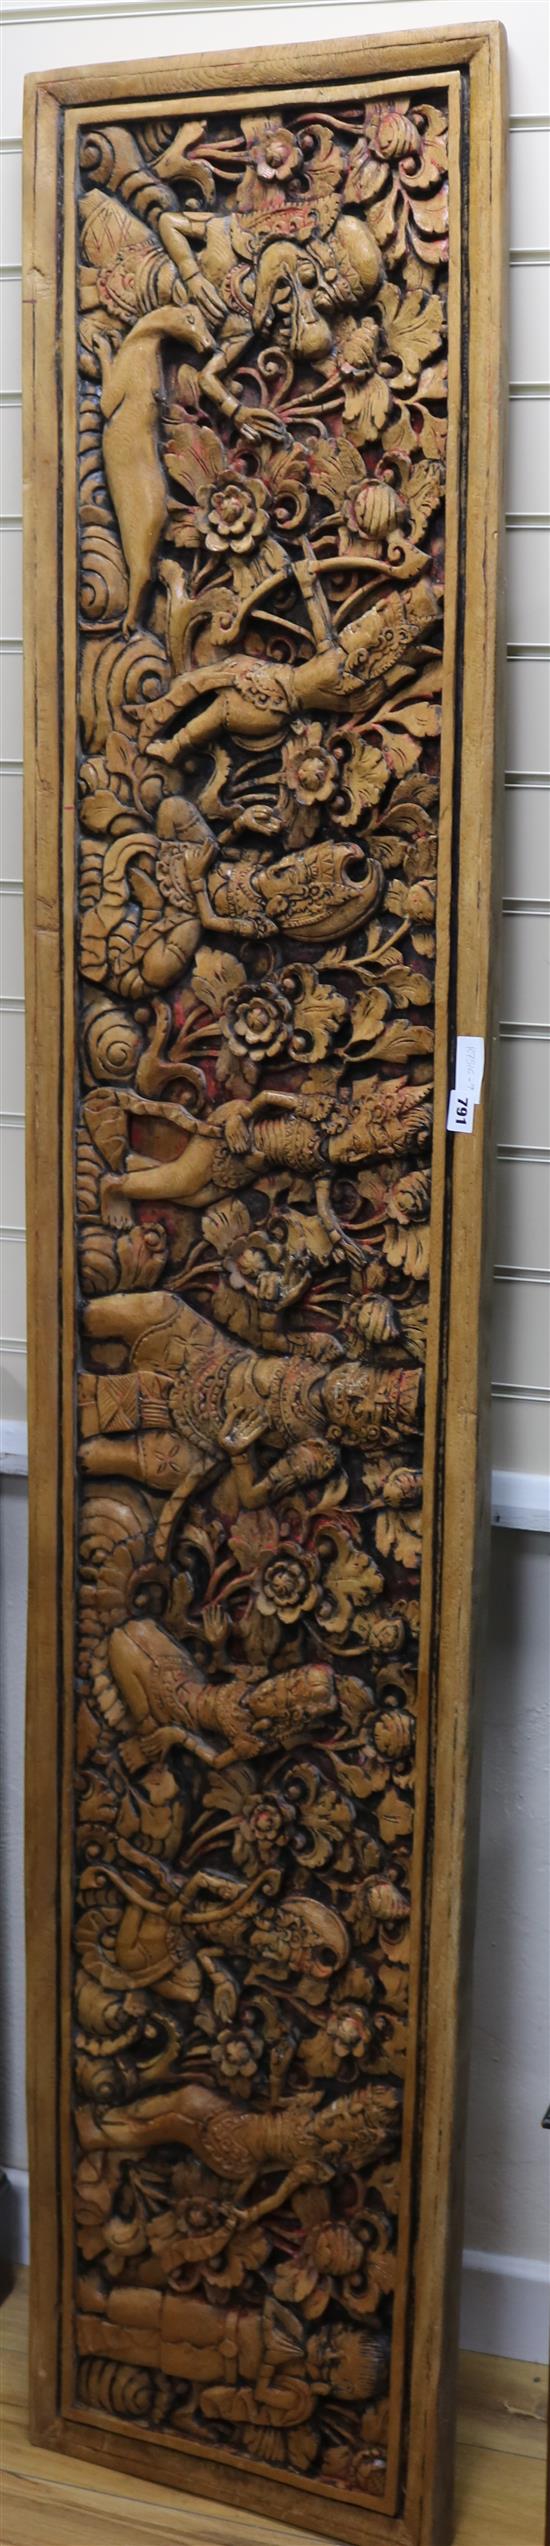 An Indonesian relief carved wood panel